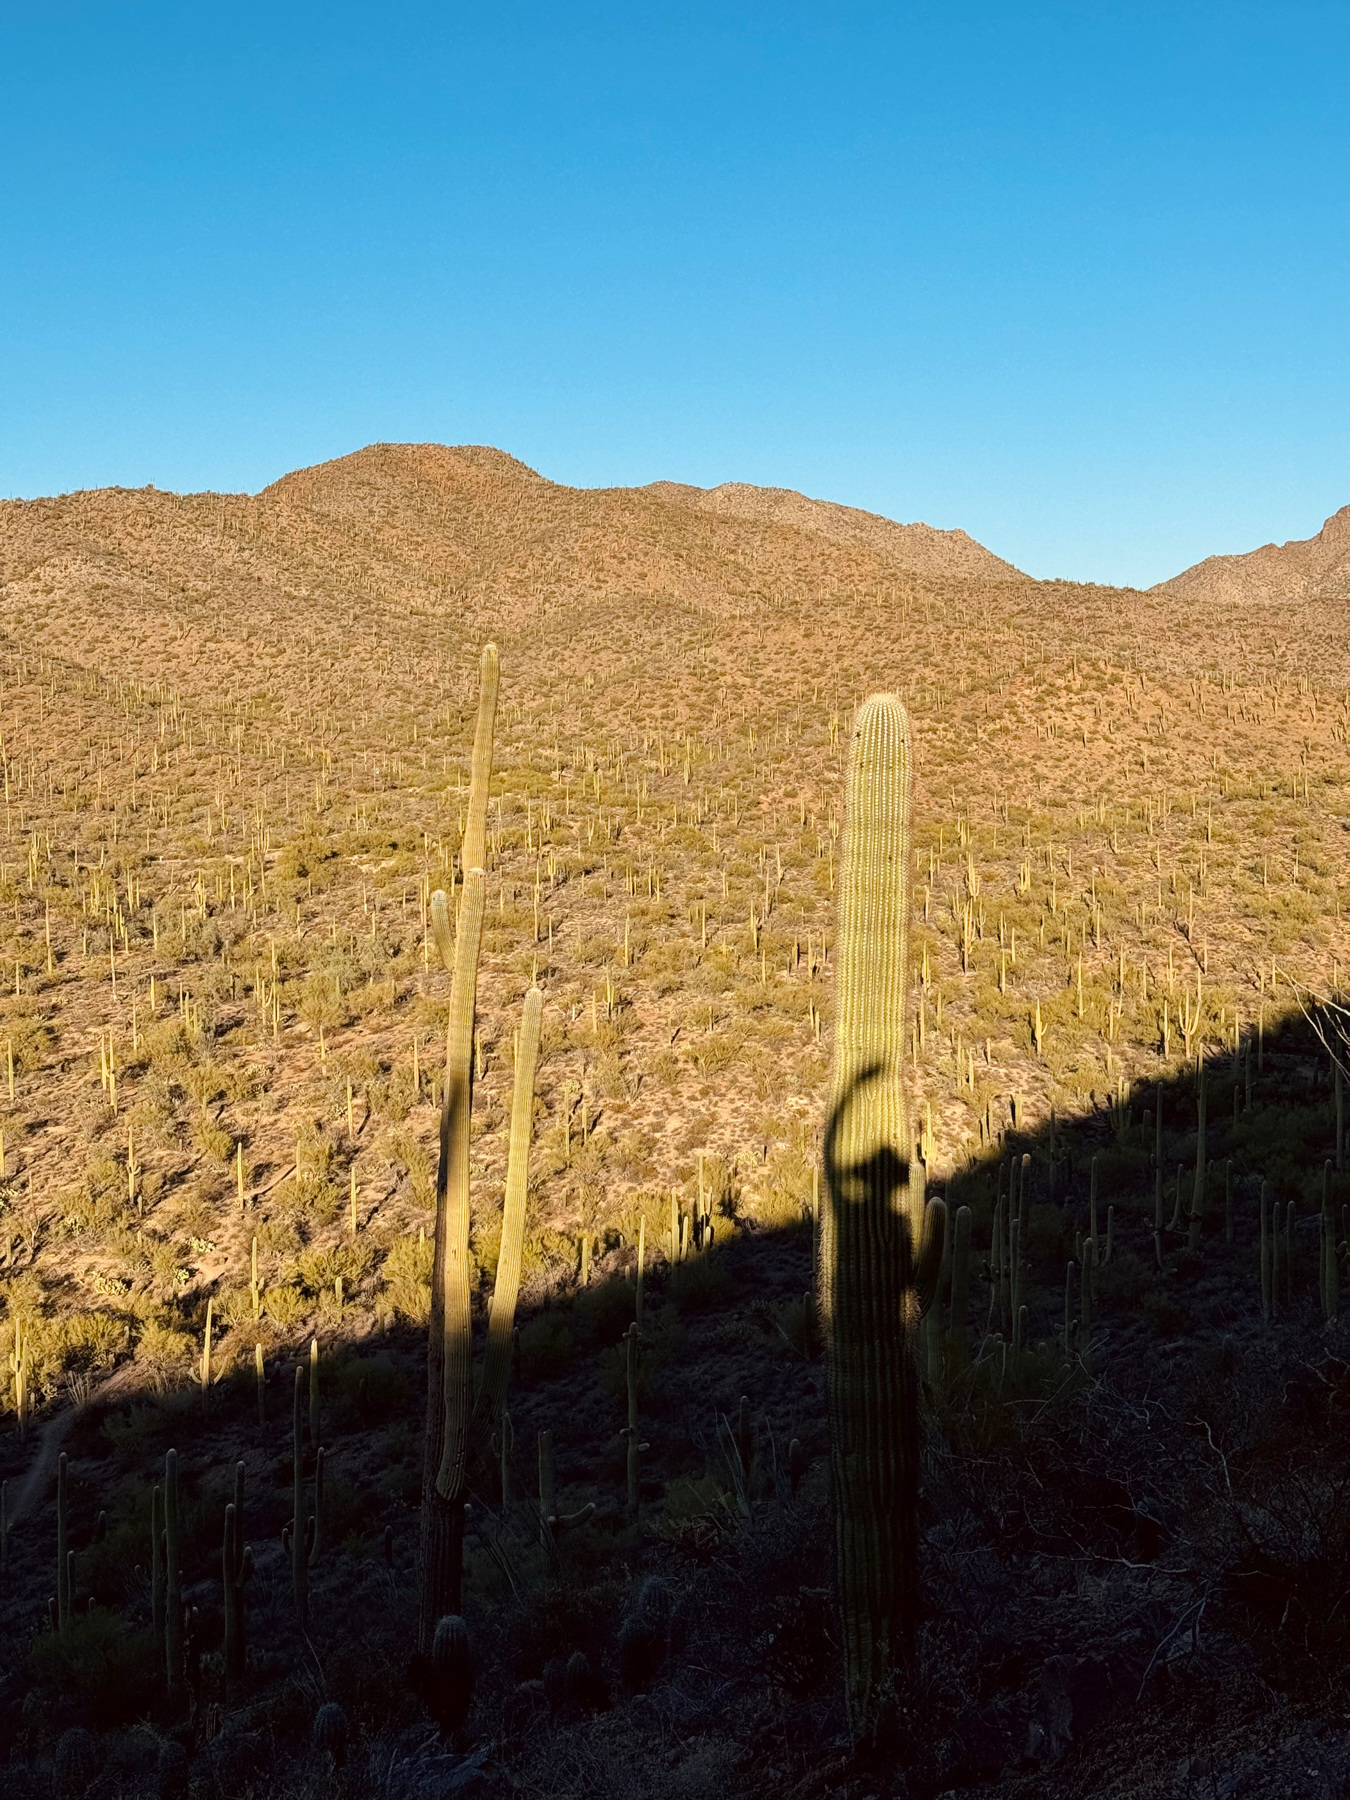 A desert landscape covered with numerous saguaro cacti and other desert vegetation with a blue sky above and mountains in the background. The shadow of a waving person is cast on the saguaro cactus in the foreground.